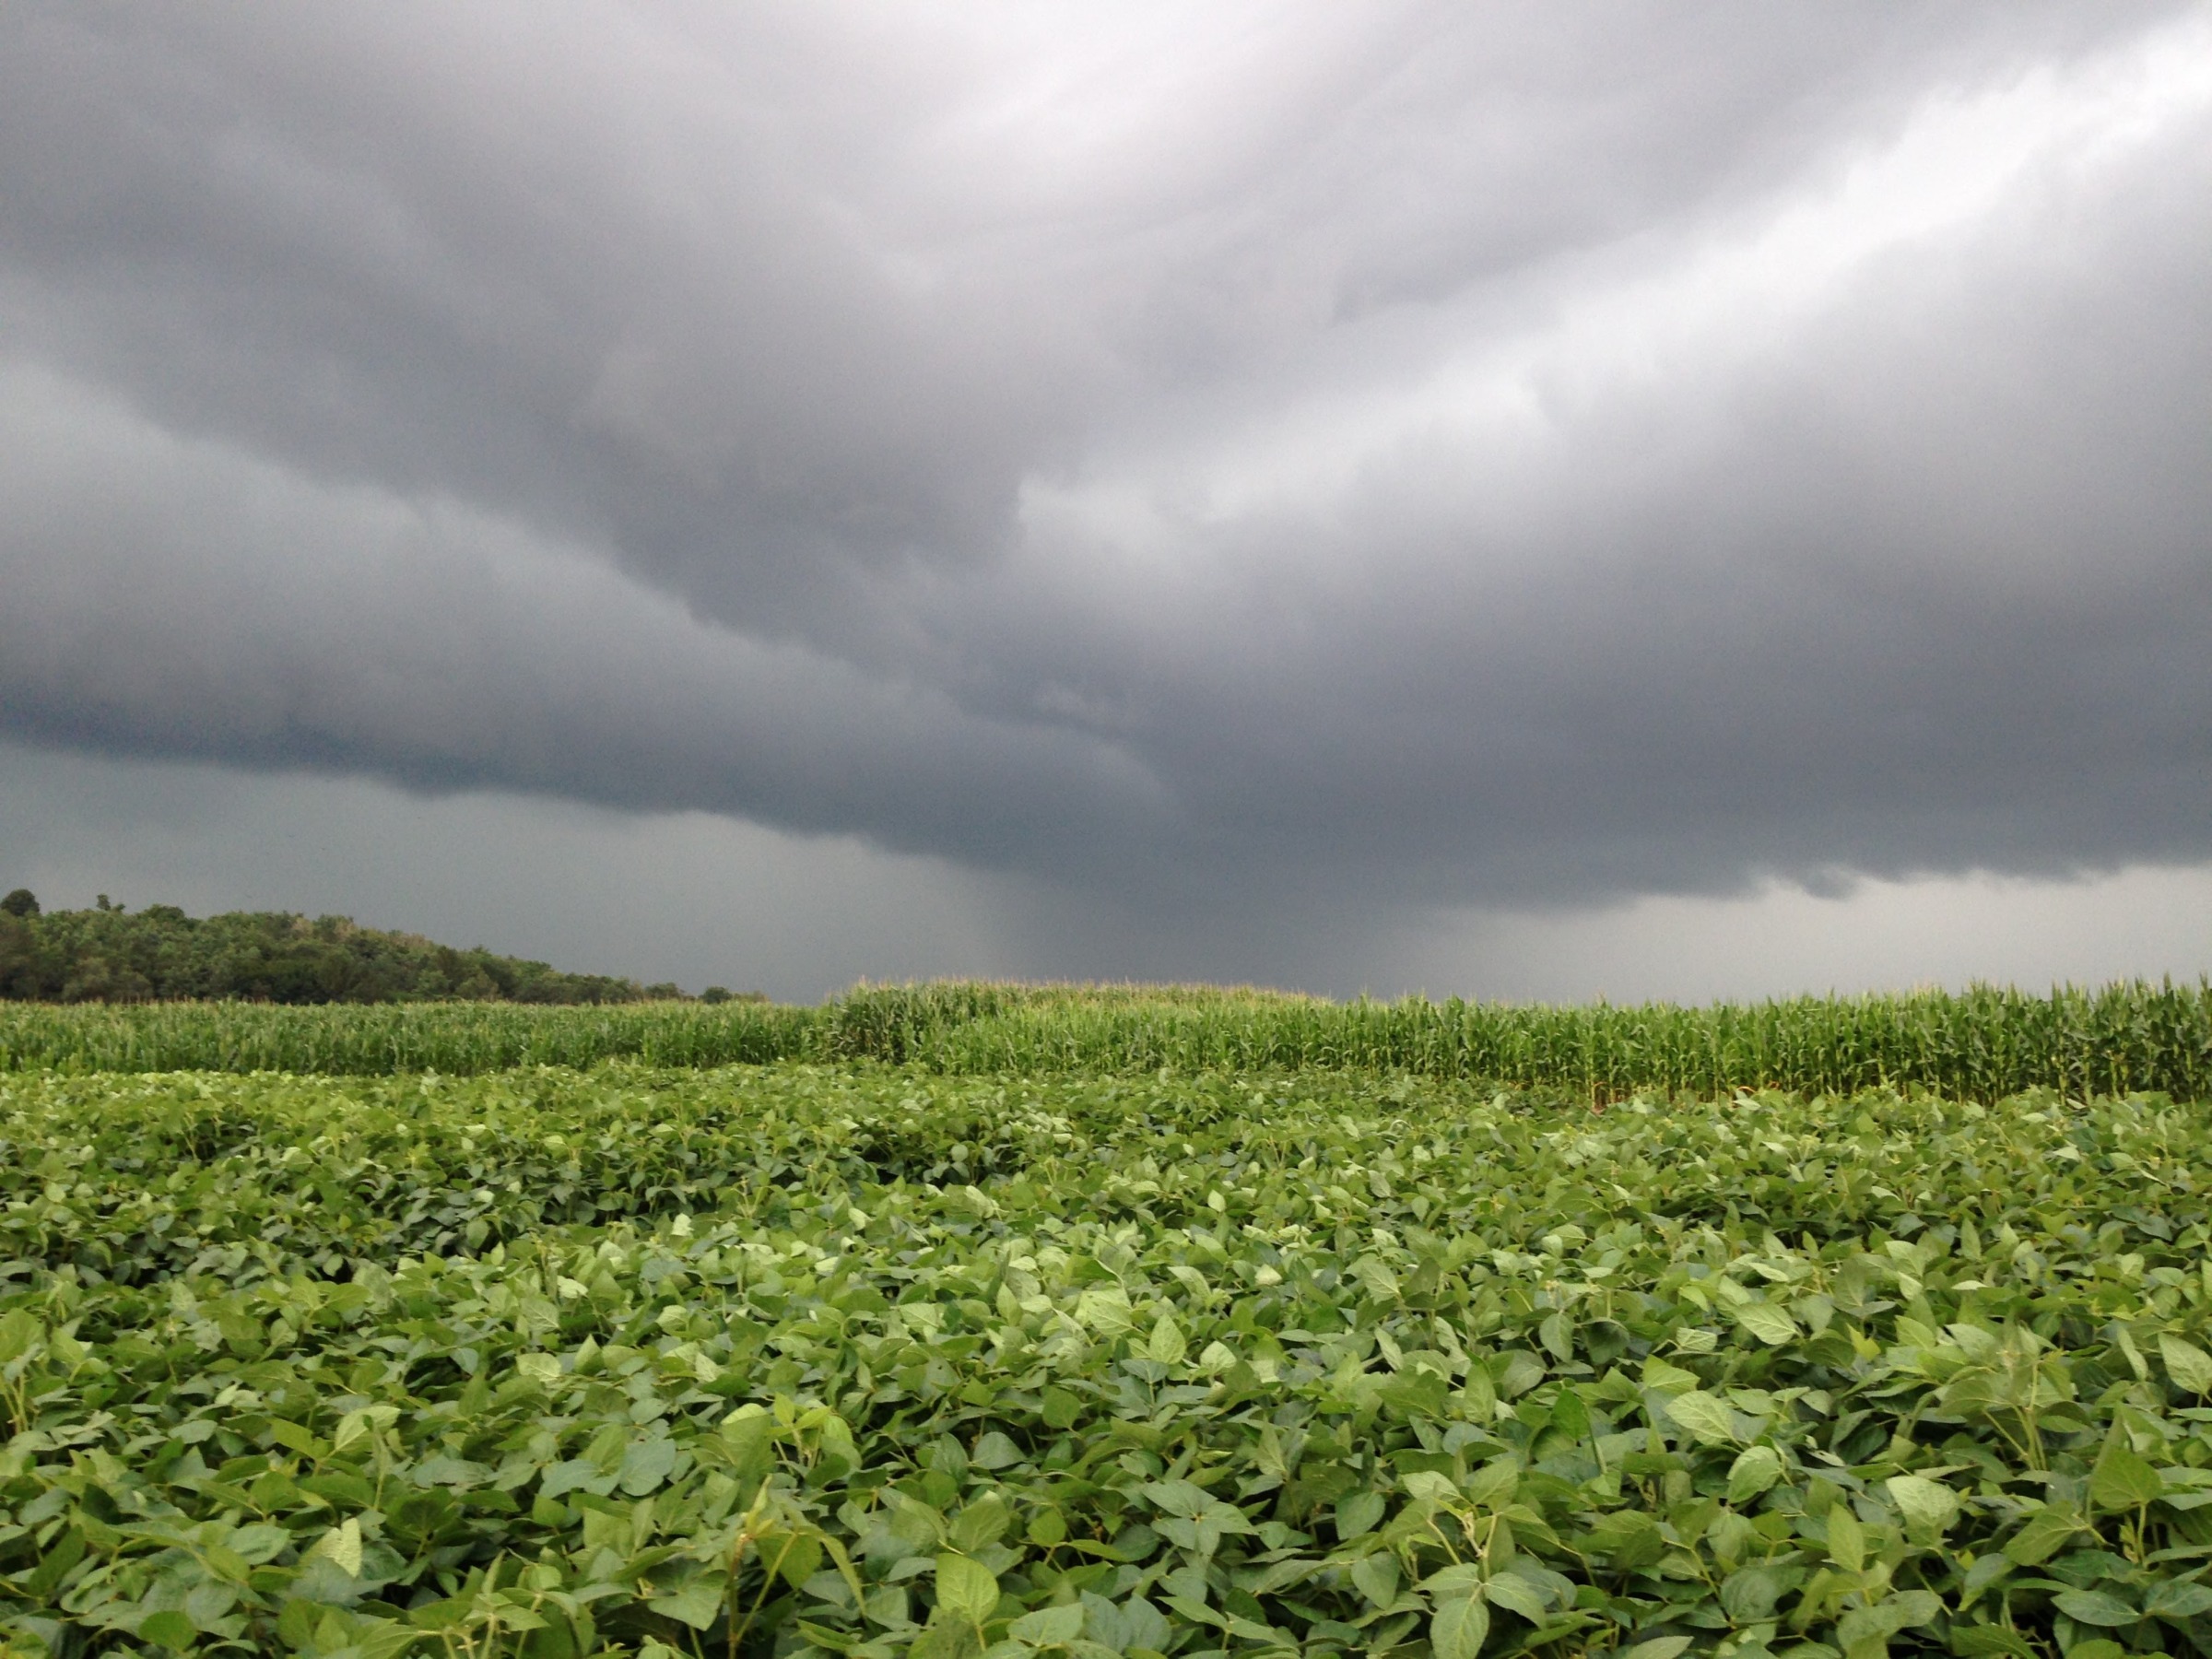 storm cloud over soybean field